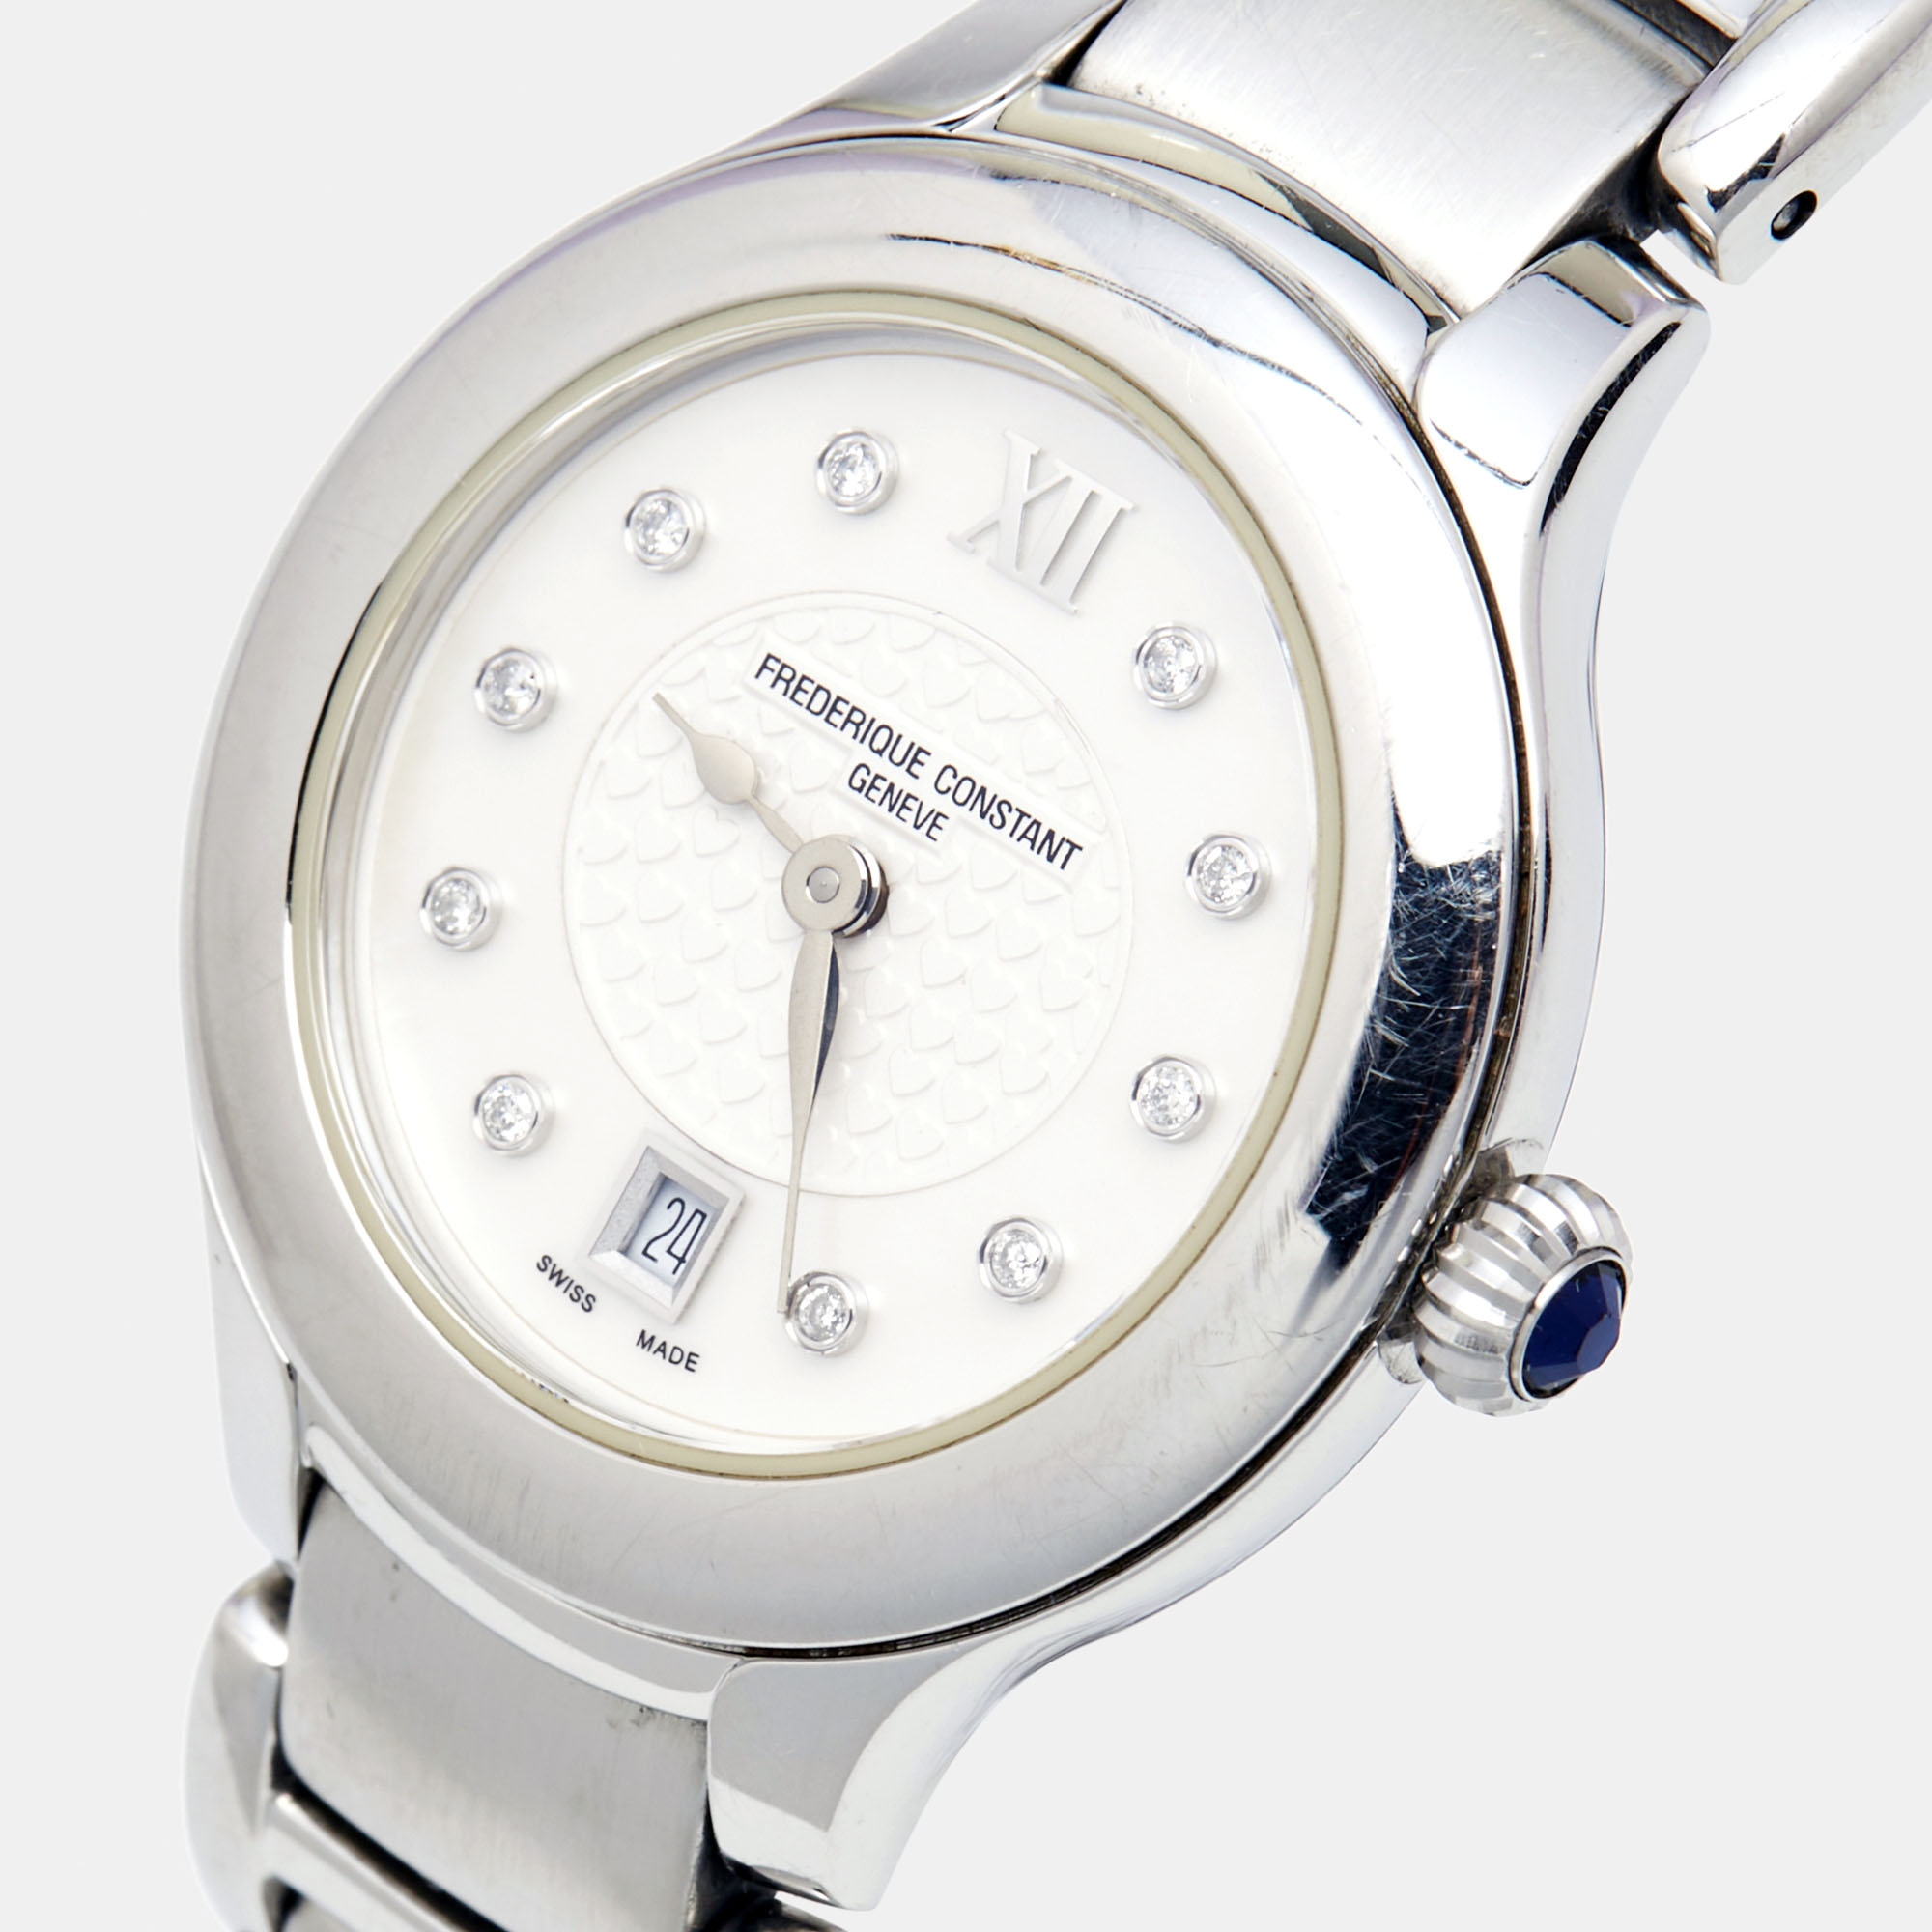 

Frederique Constant Mother Of Pearl Stainless Steel Diamond Delight FC-220X2ER22/4/5/6 Women's Wristwatch, Silver